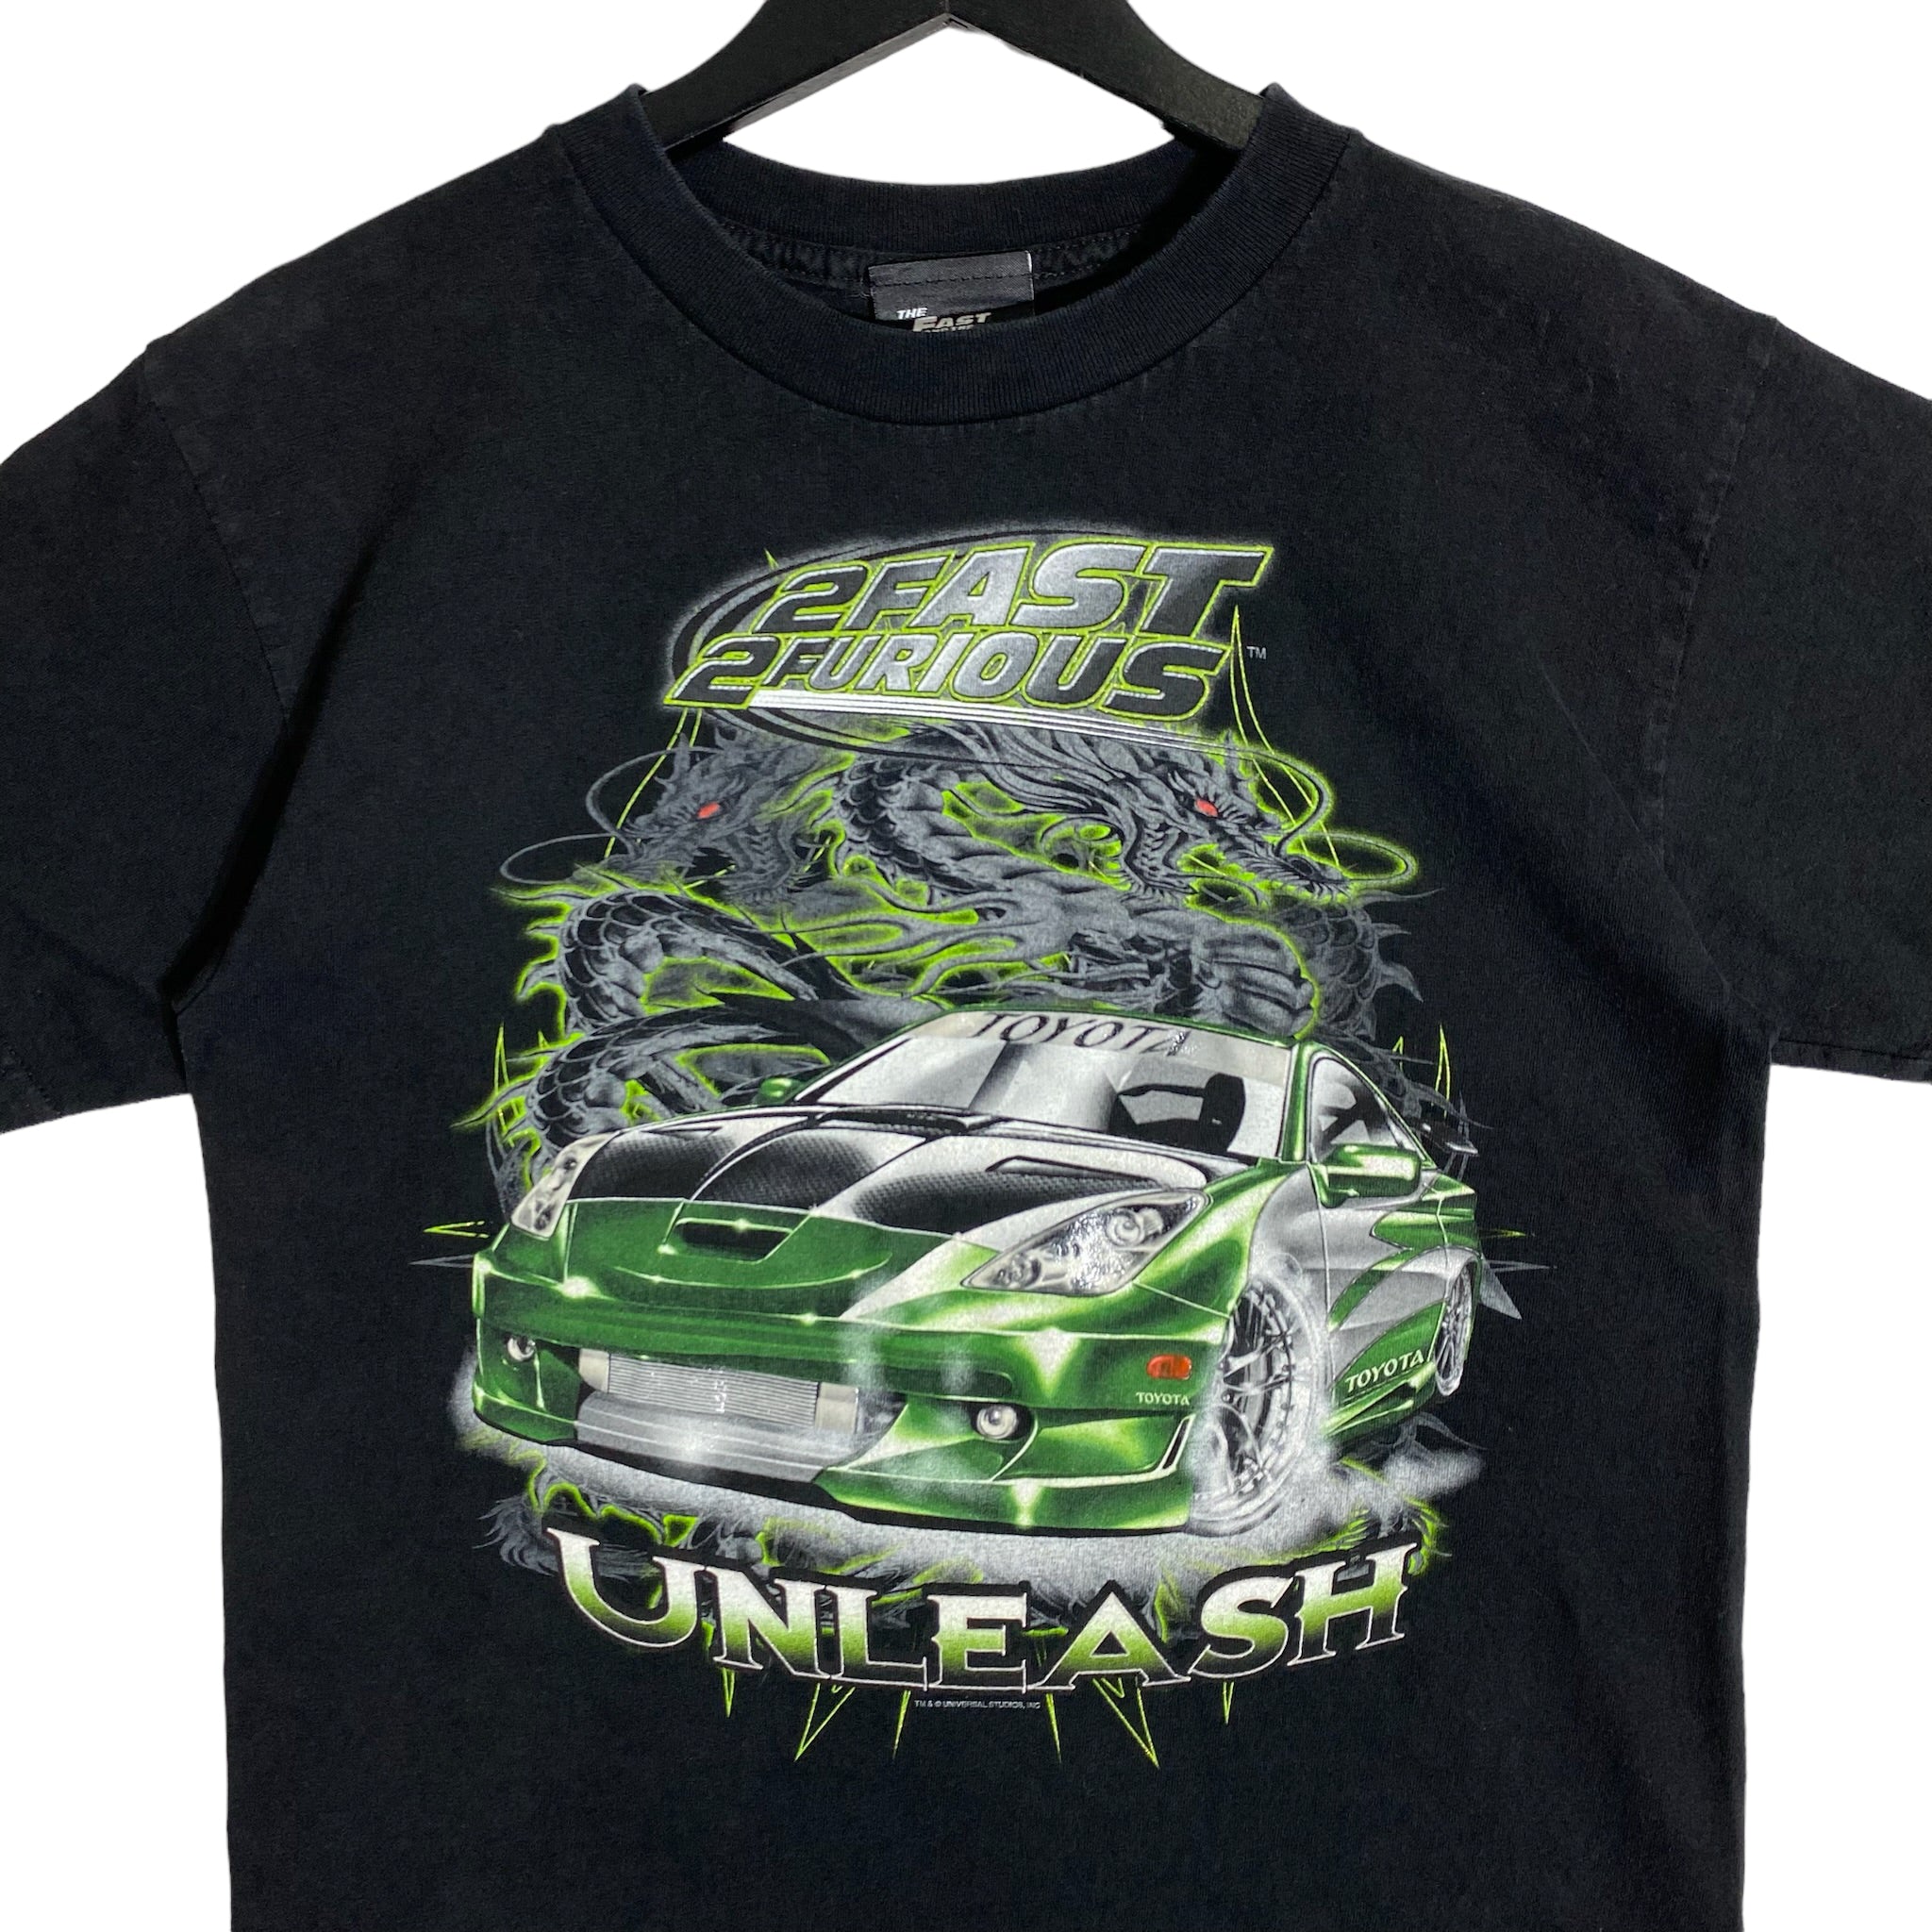 Vintage "2 Fast 2 Furious" Youth Racing Tee